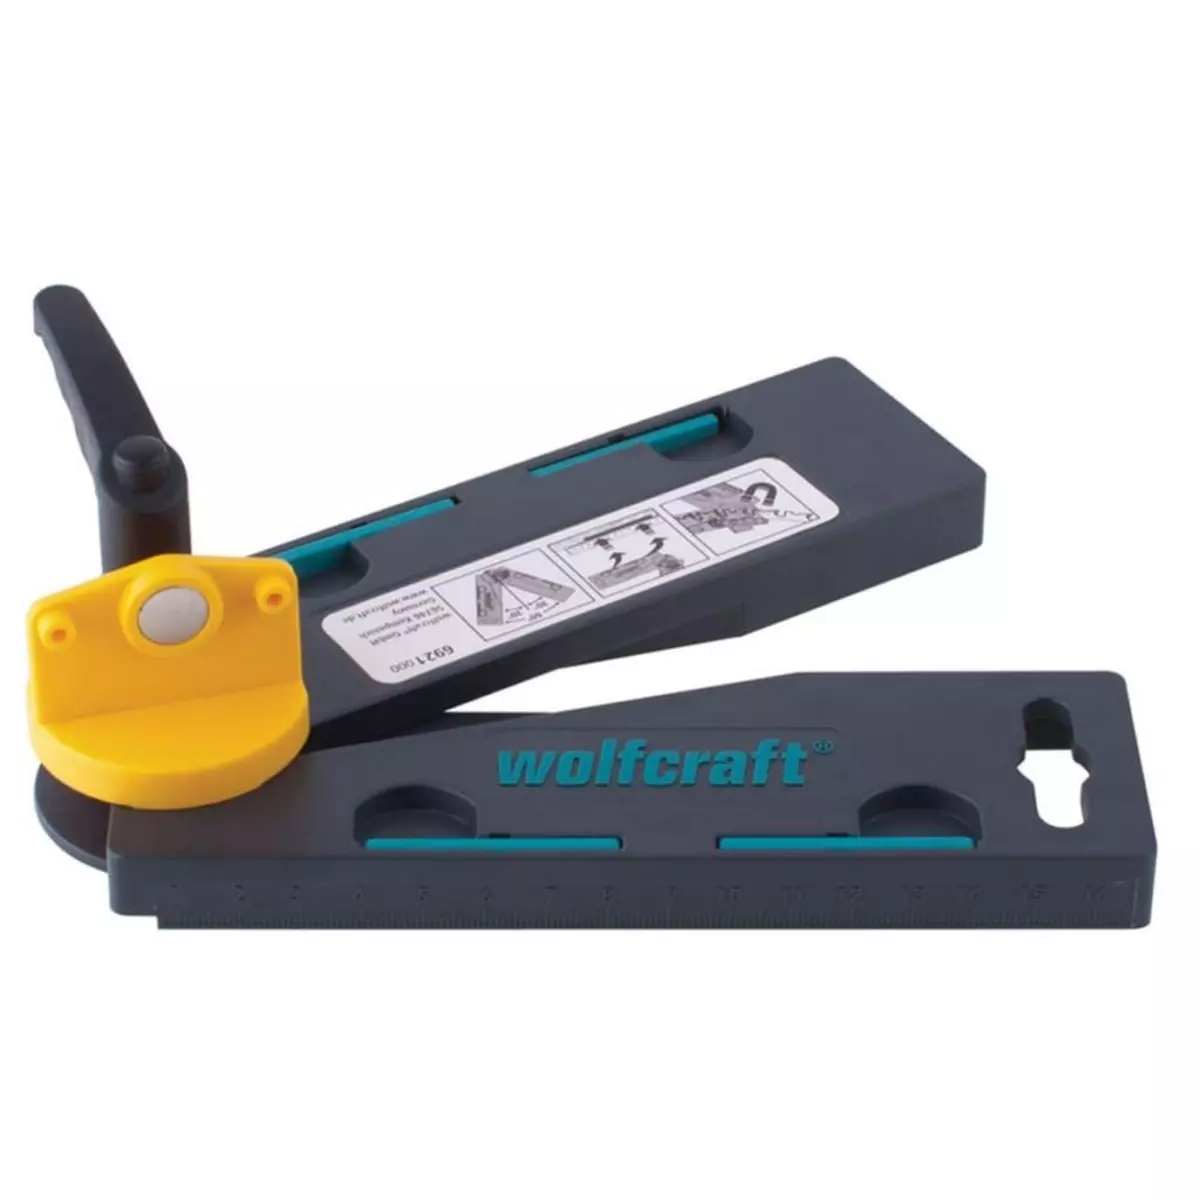 WOLFCRAFT wolfcraft Fausse equerre avec bissectrice d'angle 6921000